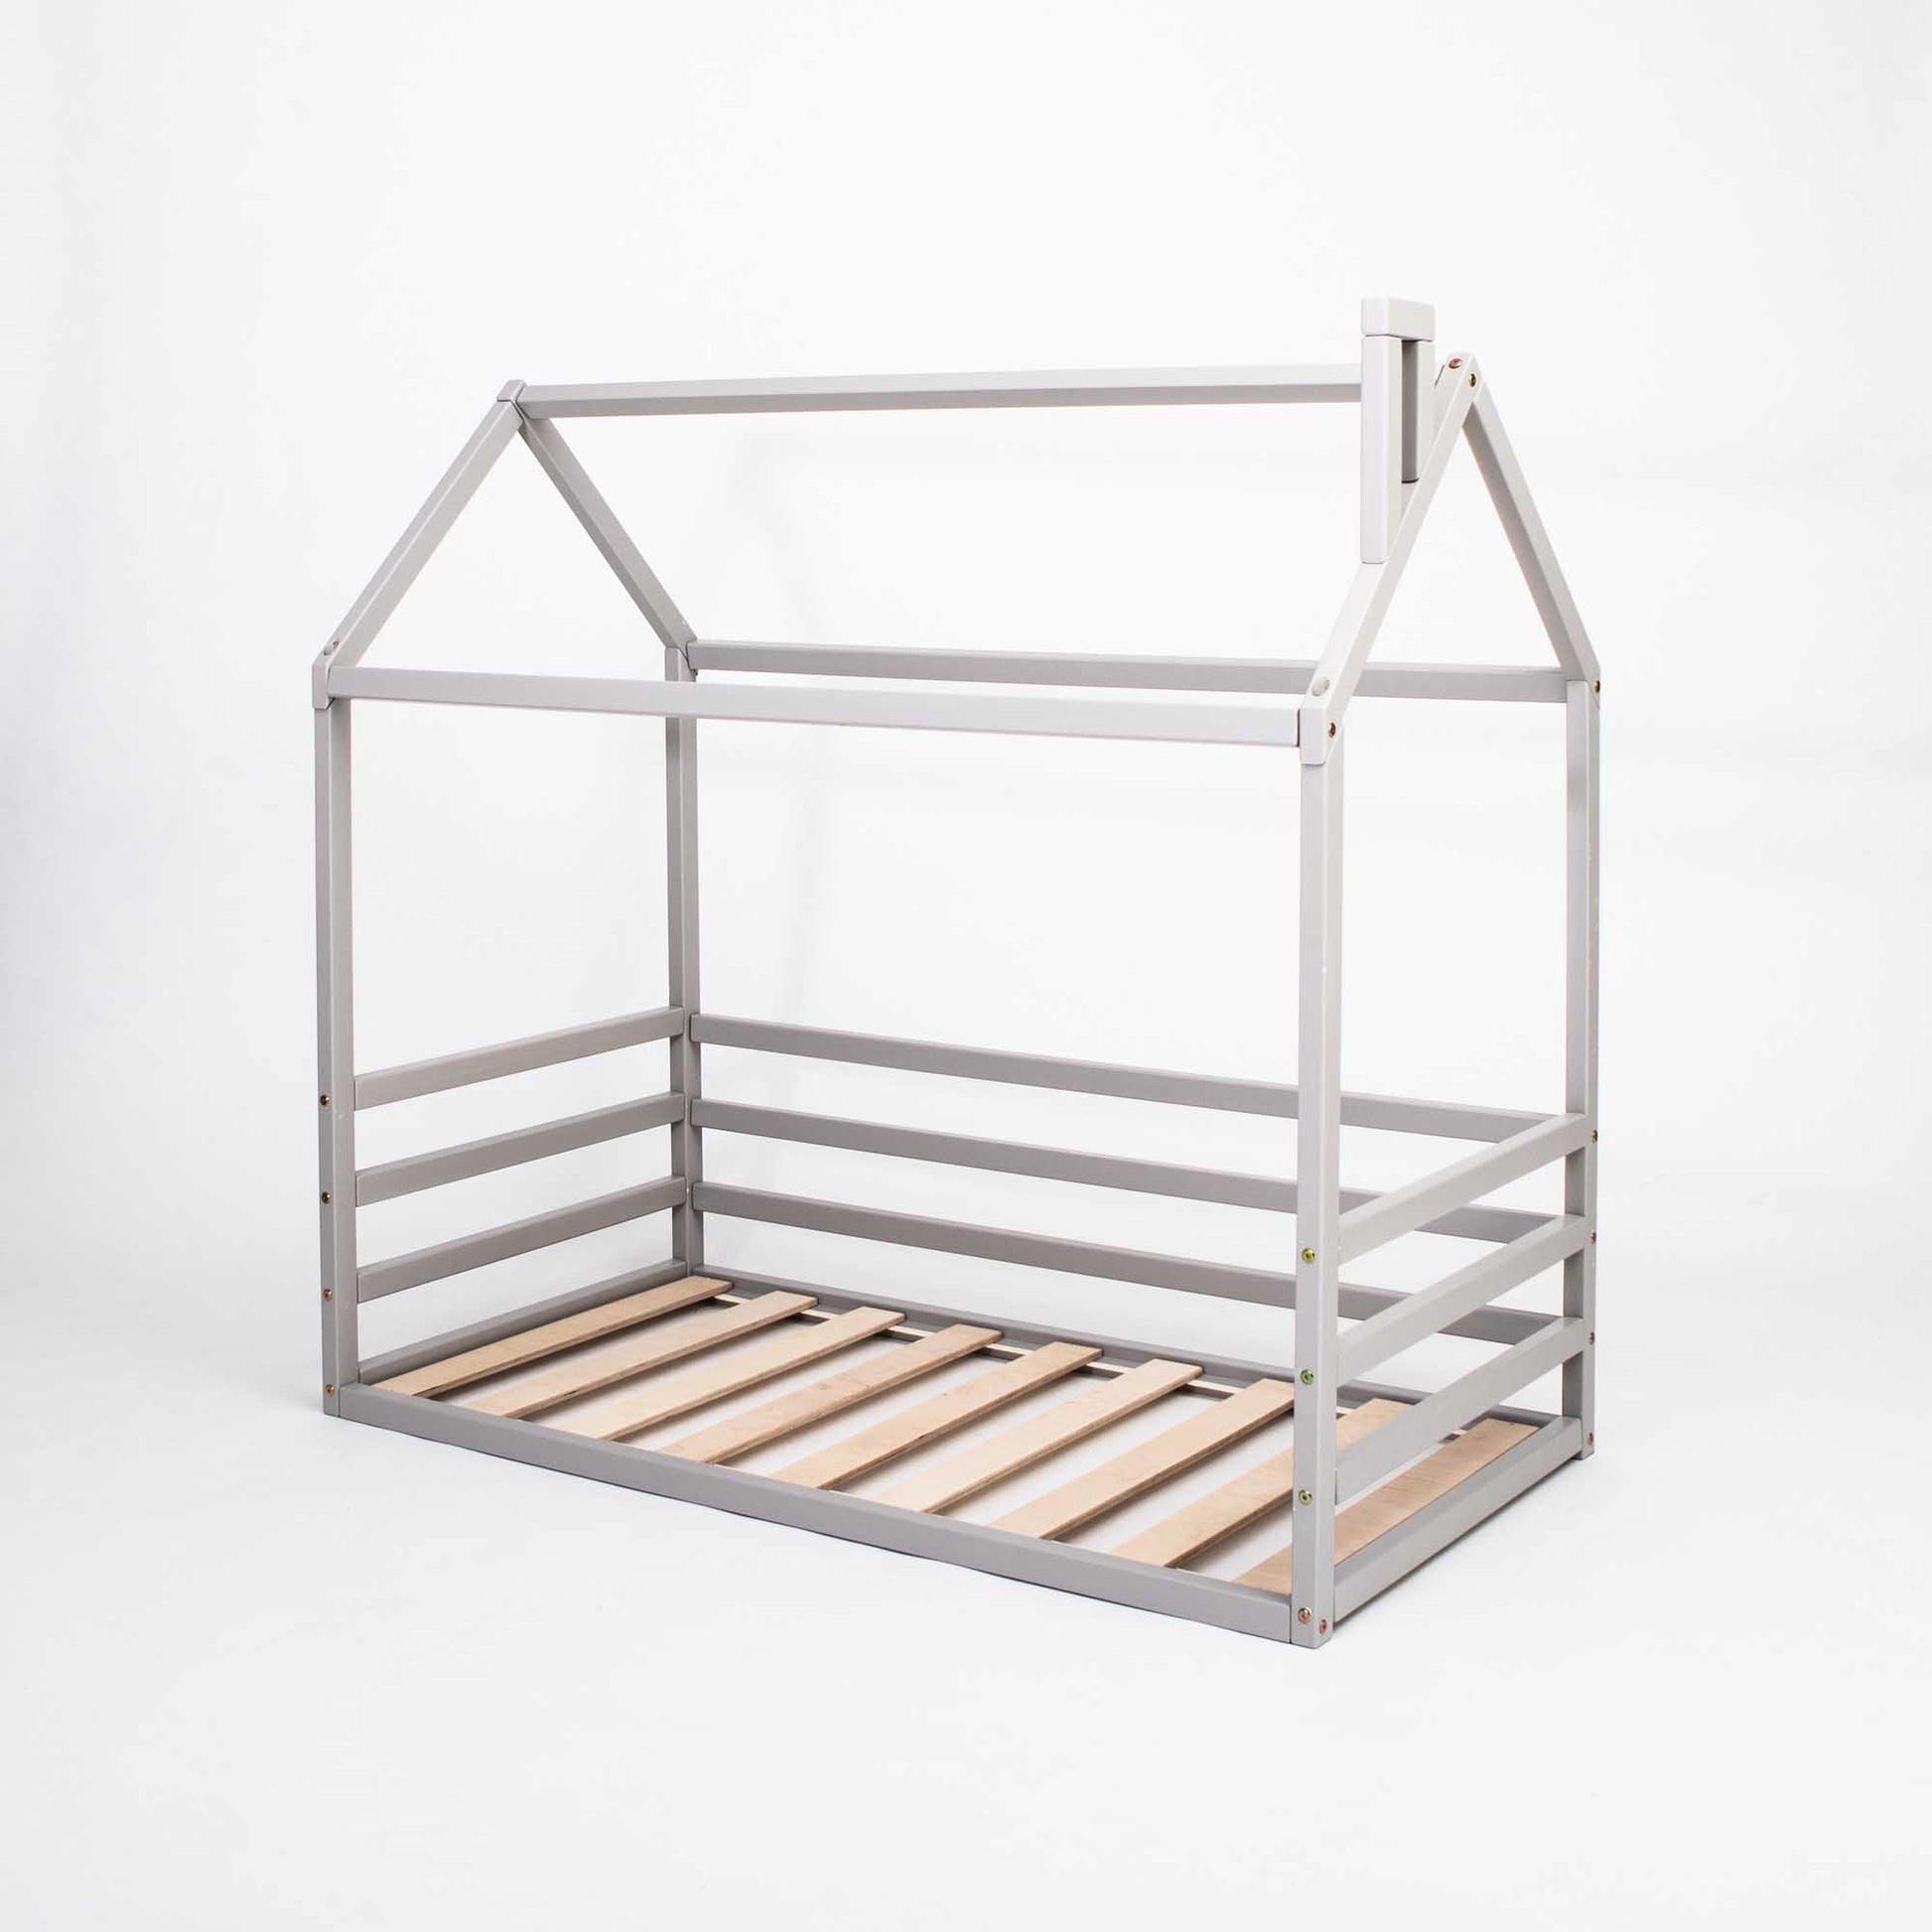 A grey wooden Kids' house-frame bed with 3-sided horizontal rails.